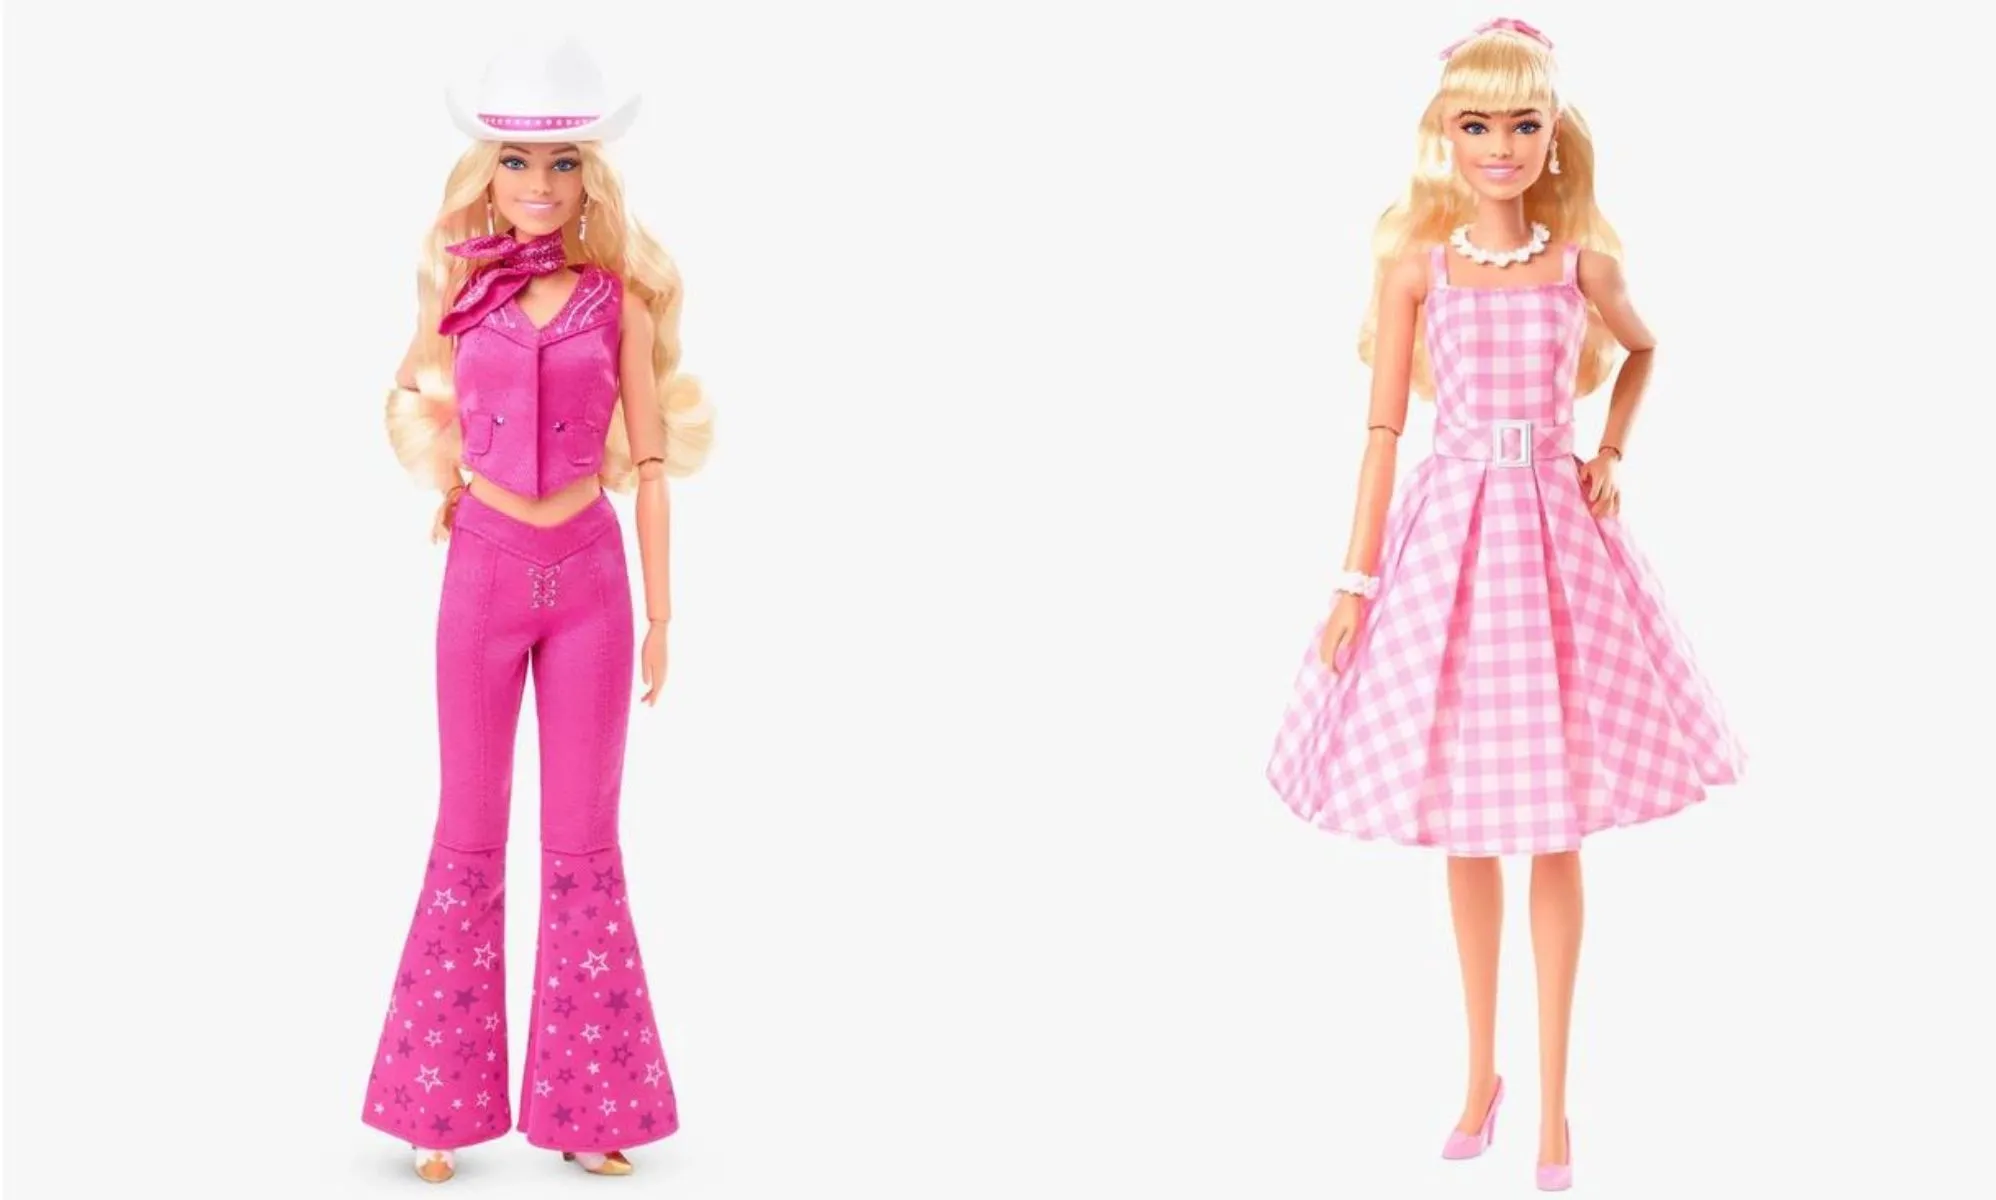 This is where you can buy the new Barbie movie dolls